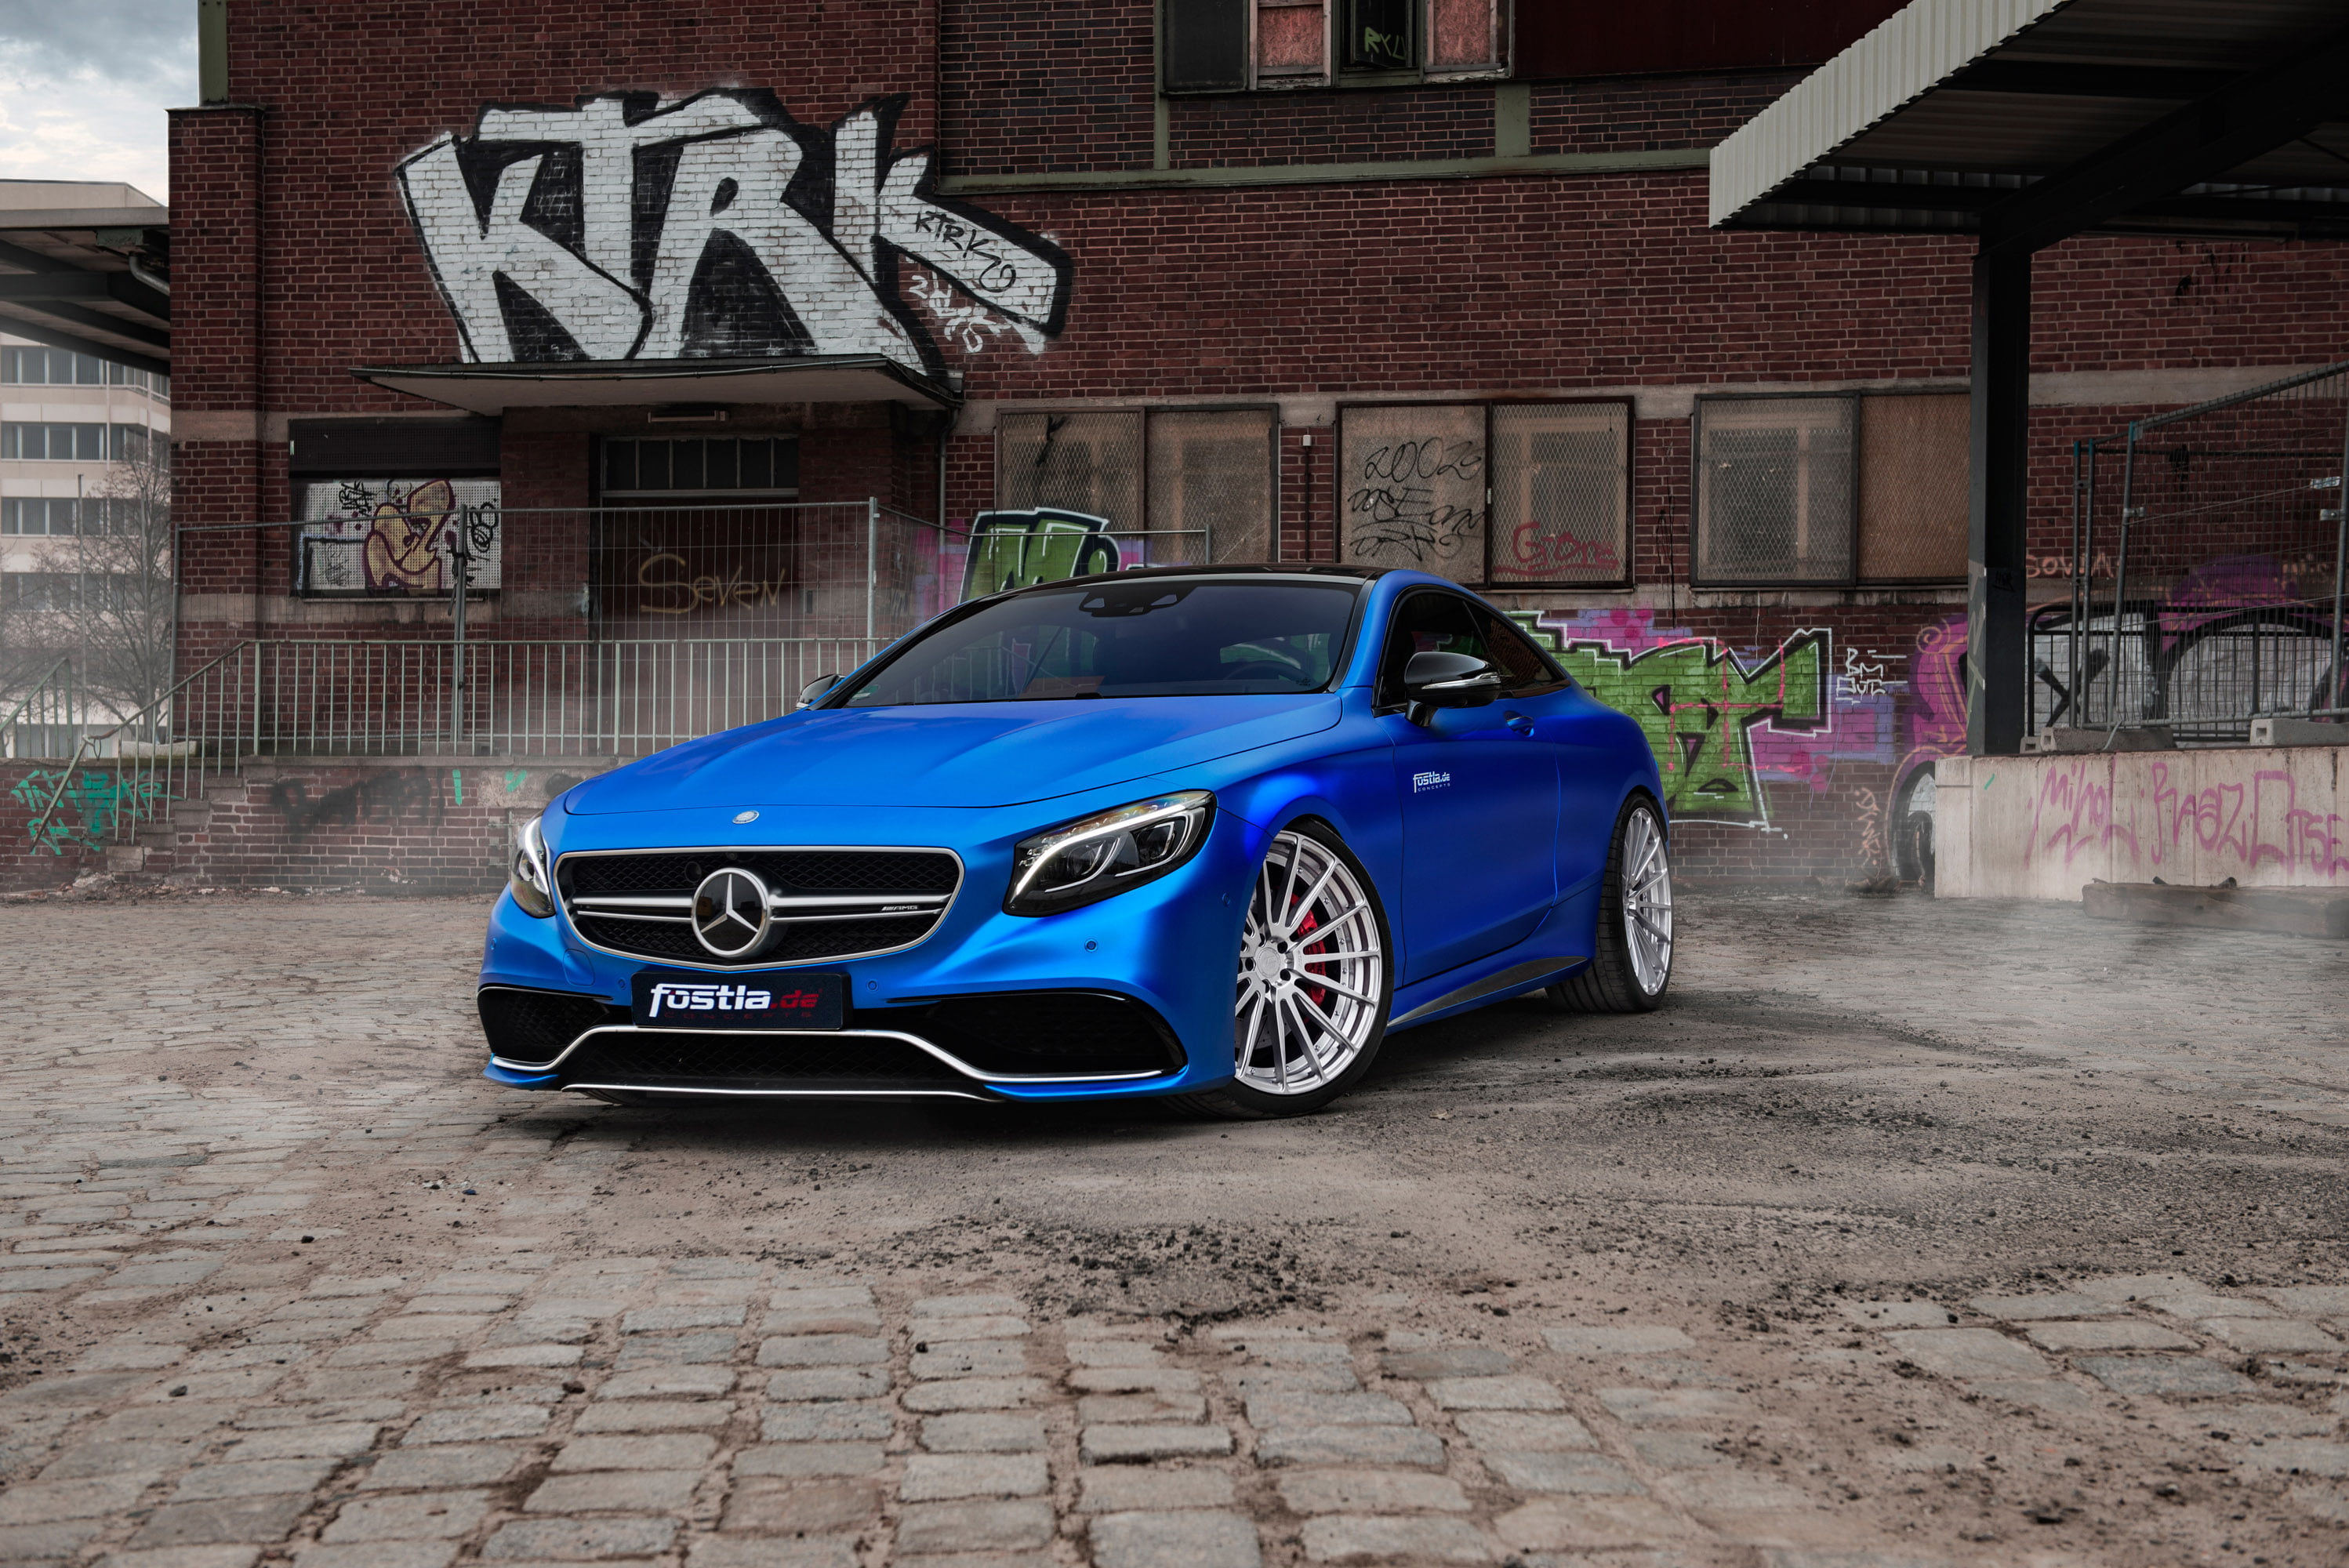 Mercedes Benz C63 Amg 2017 Coupe Tuning - HD Wallpaper 